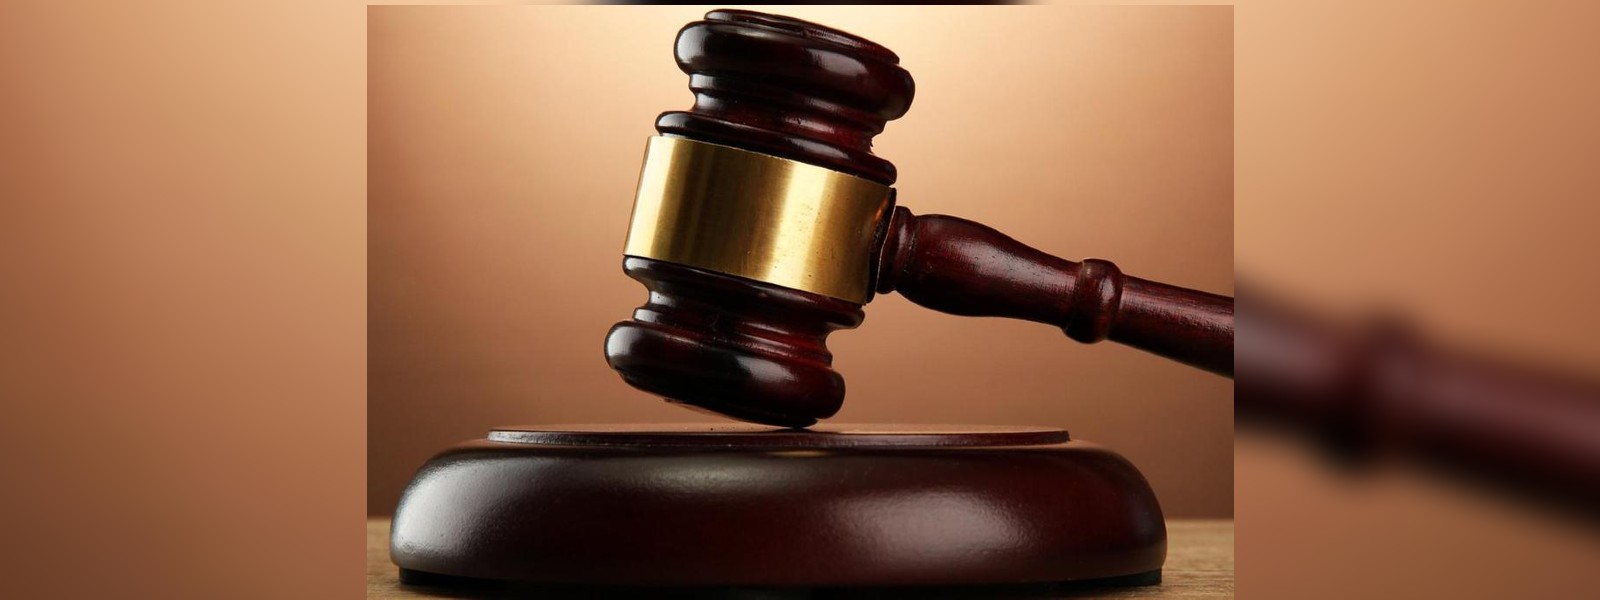 04 suspects found guilty of murder, sentenced to death by Kalutara HC